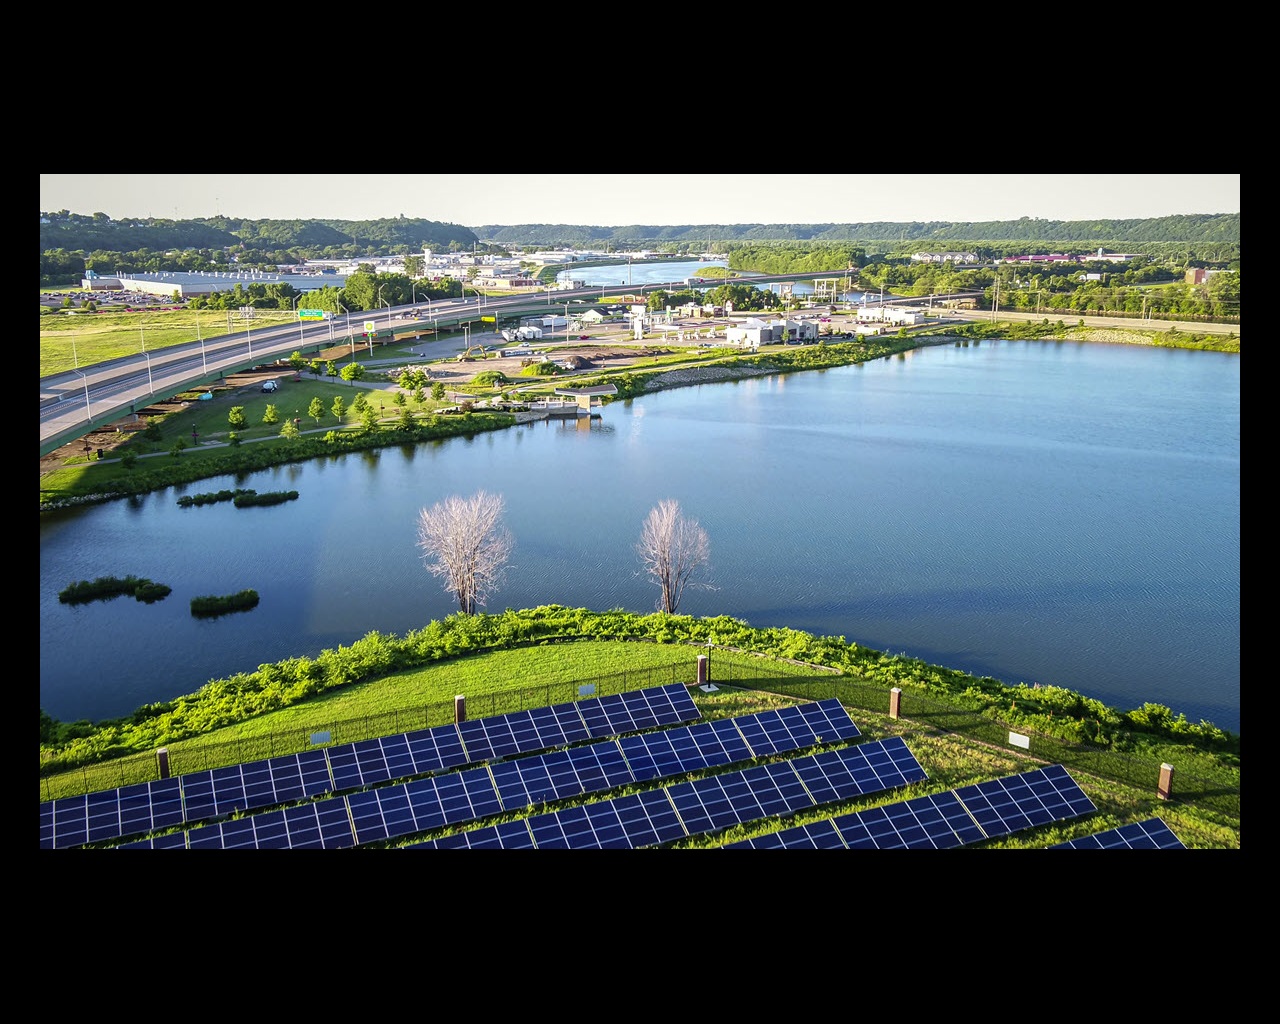 Aerial view of Alliant Energy solar field